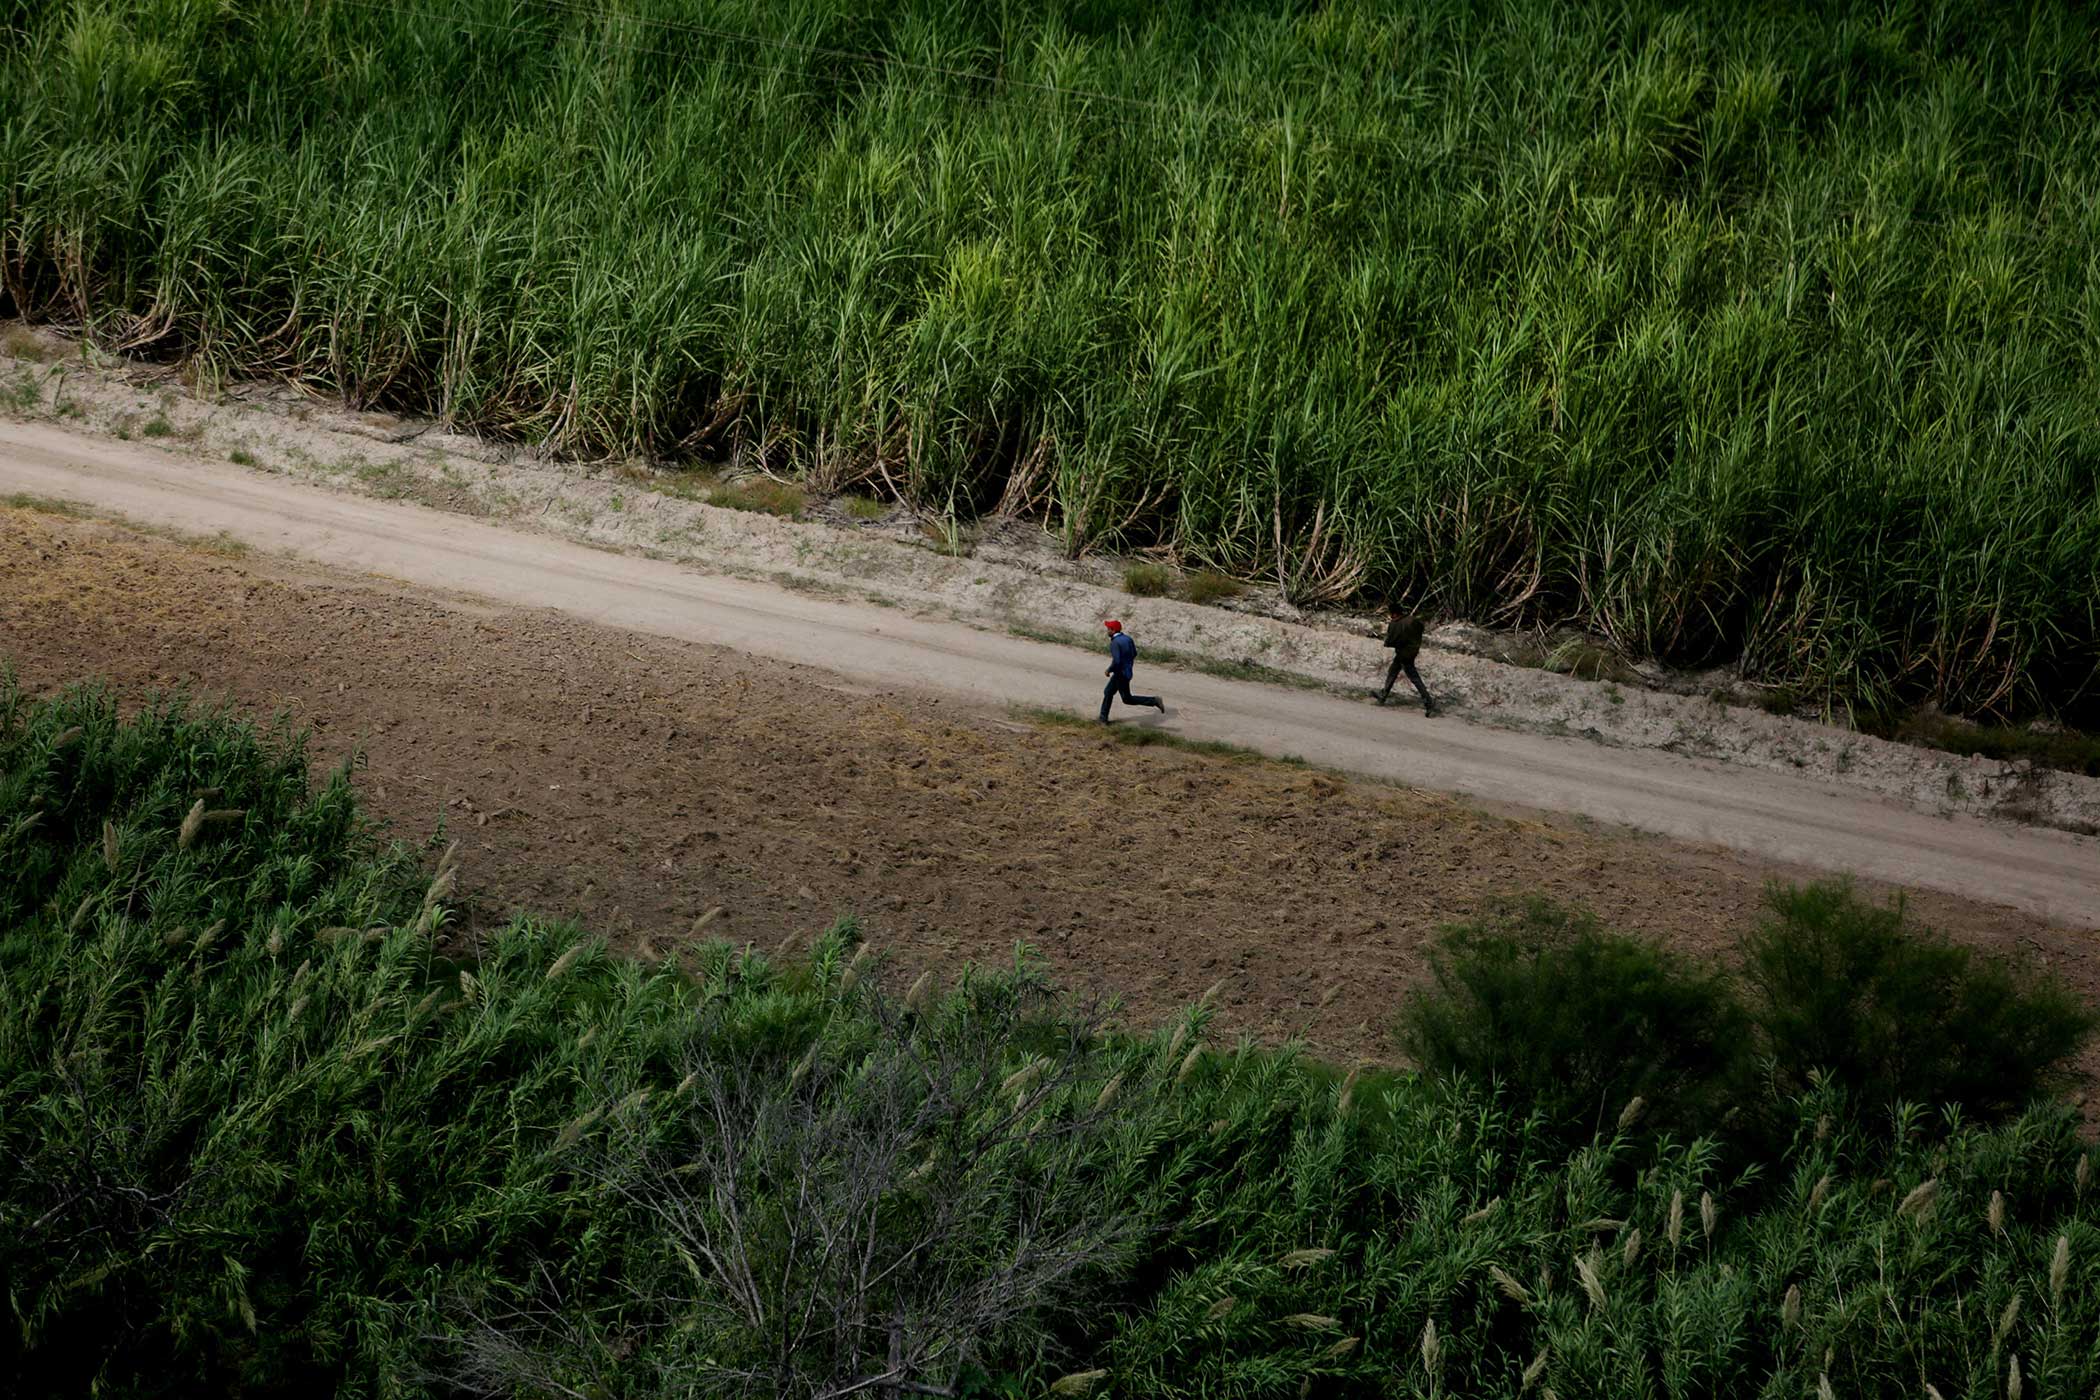 Two suspected migrants run away from the Border Patrol near the banks of the Rio Grande River in Mission, Texas.